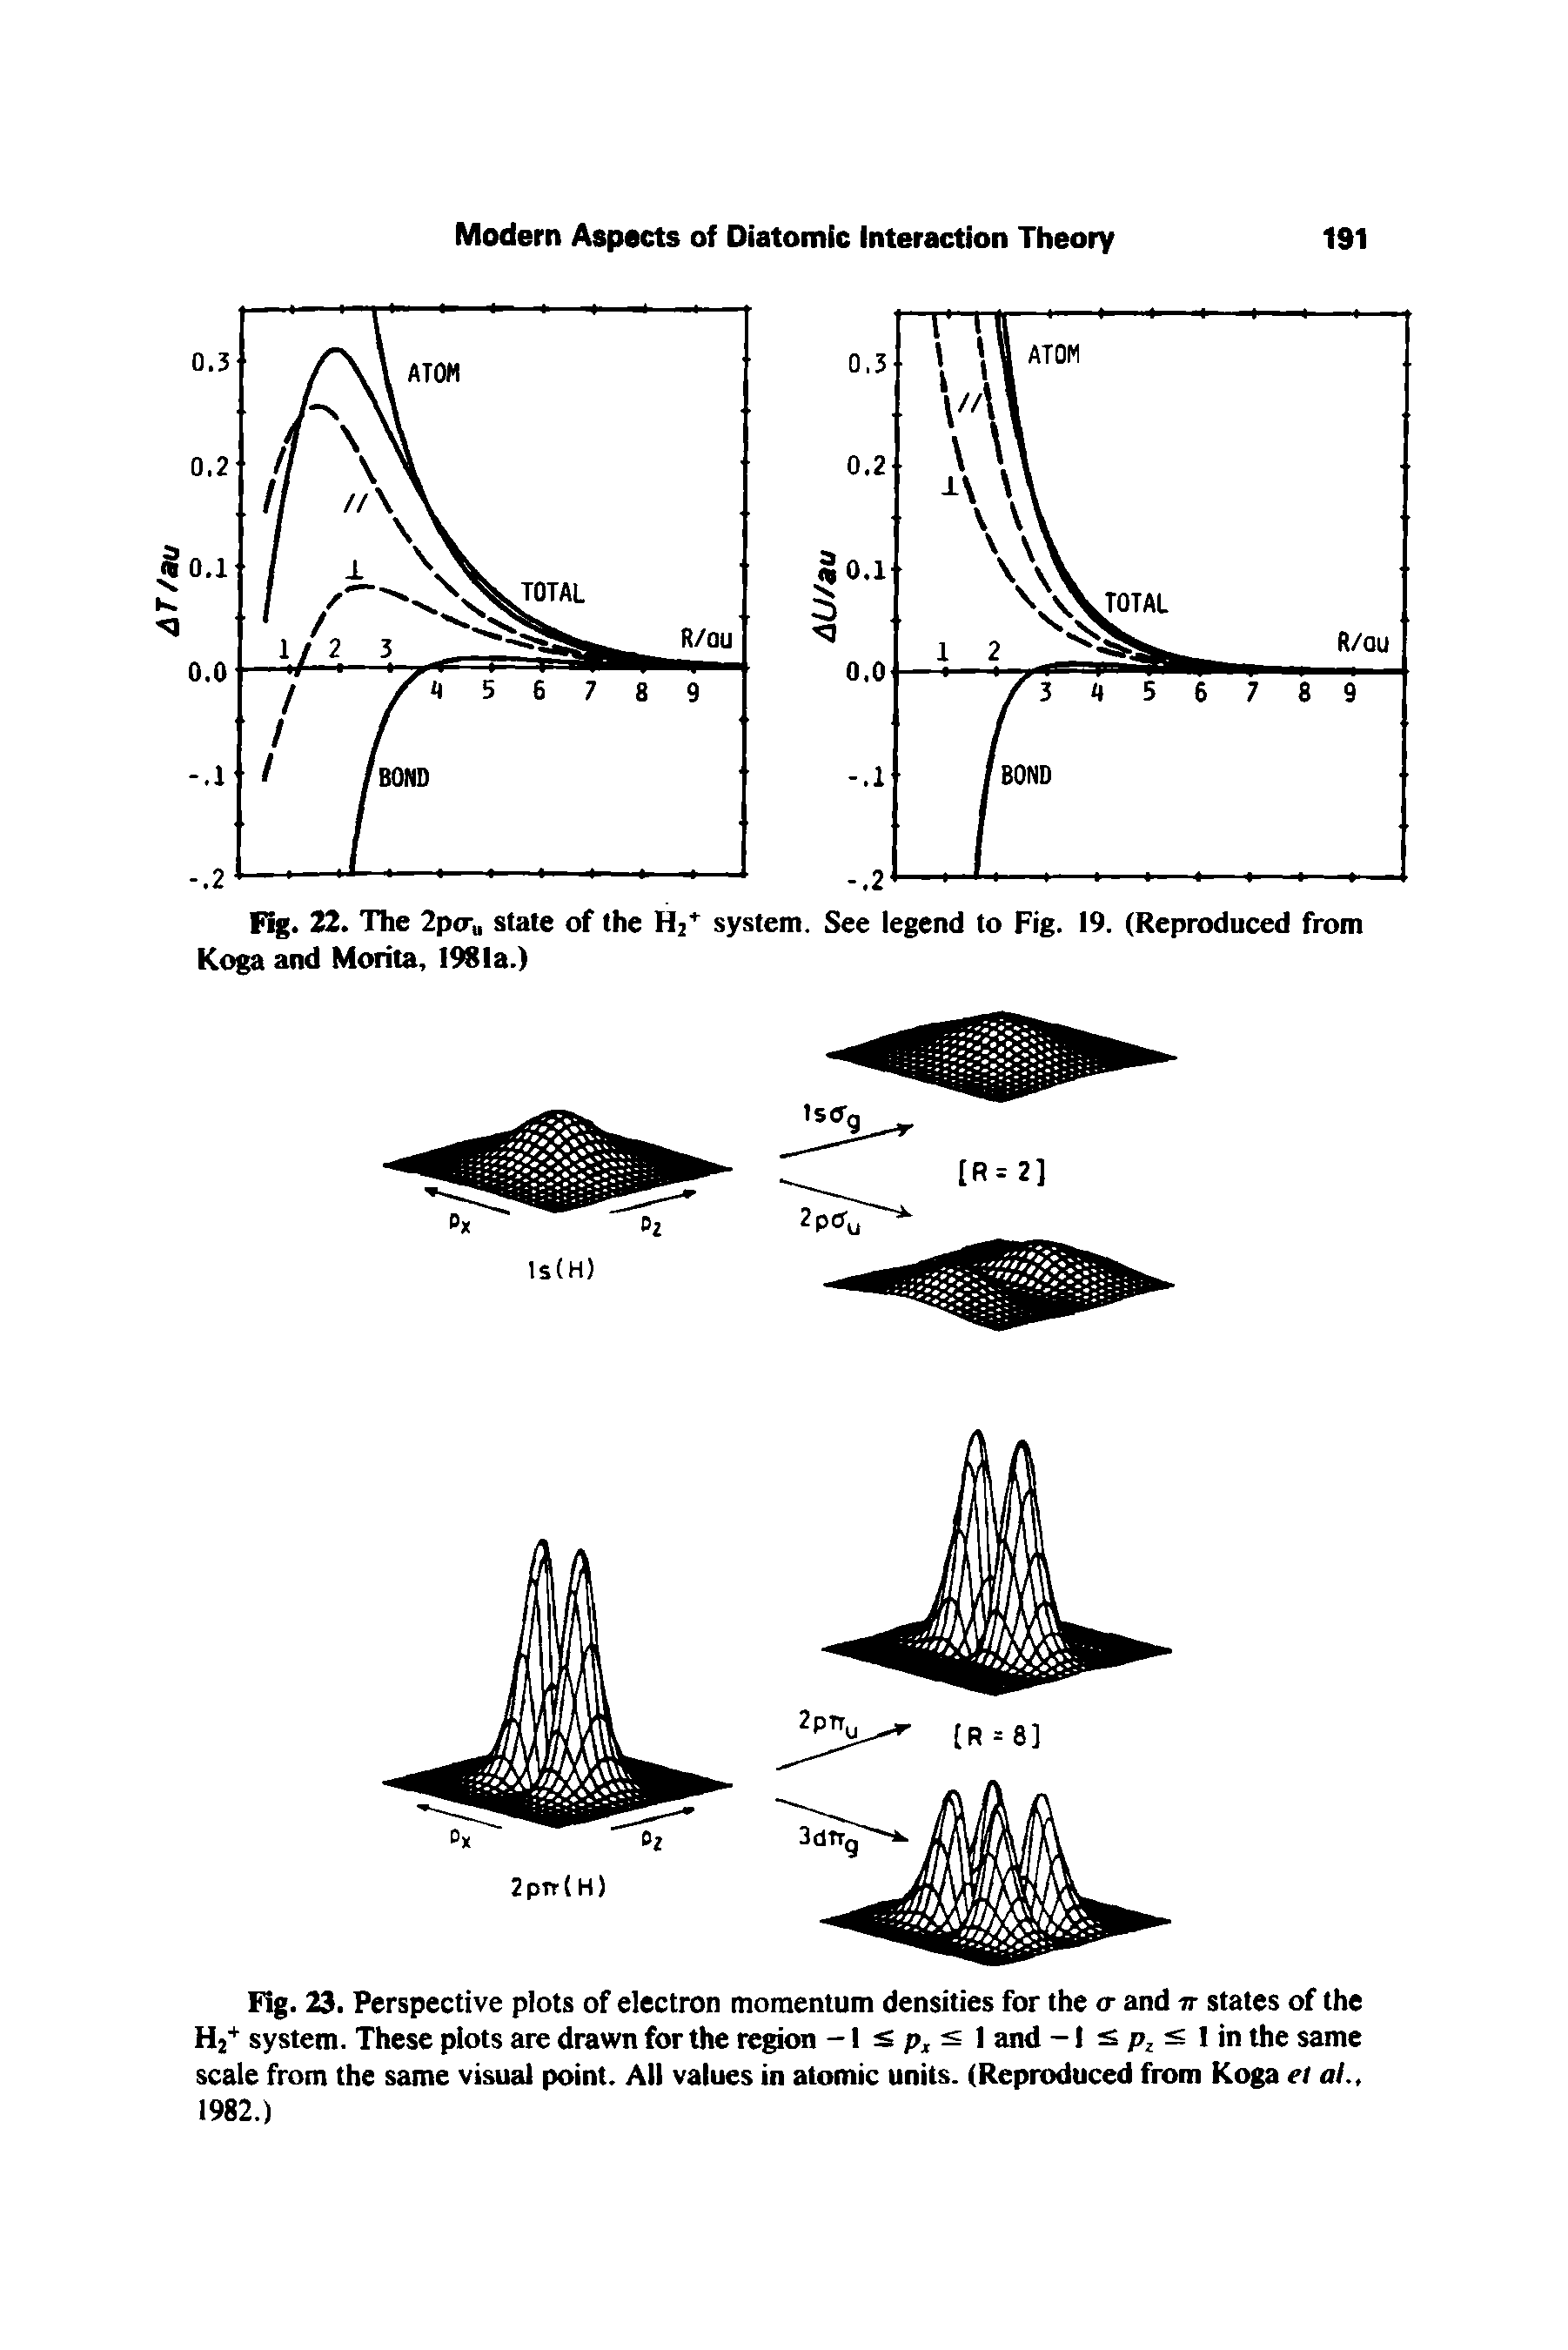 Fig. 23. Perspective plots of electron momentum densities for the <r and it states of the H2+ system. These plots are drawn for the region -1 l and -1 1 in the same...